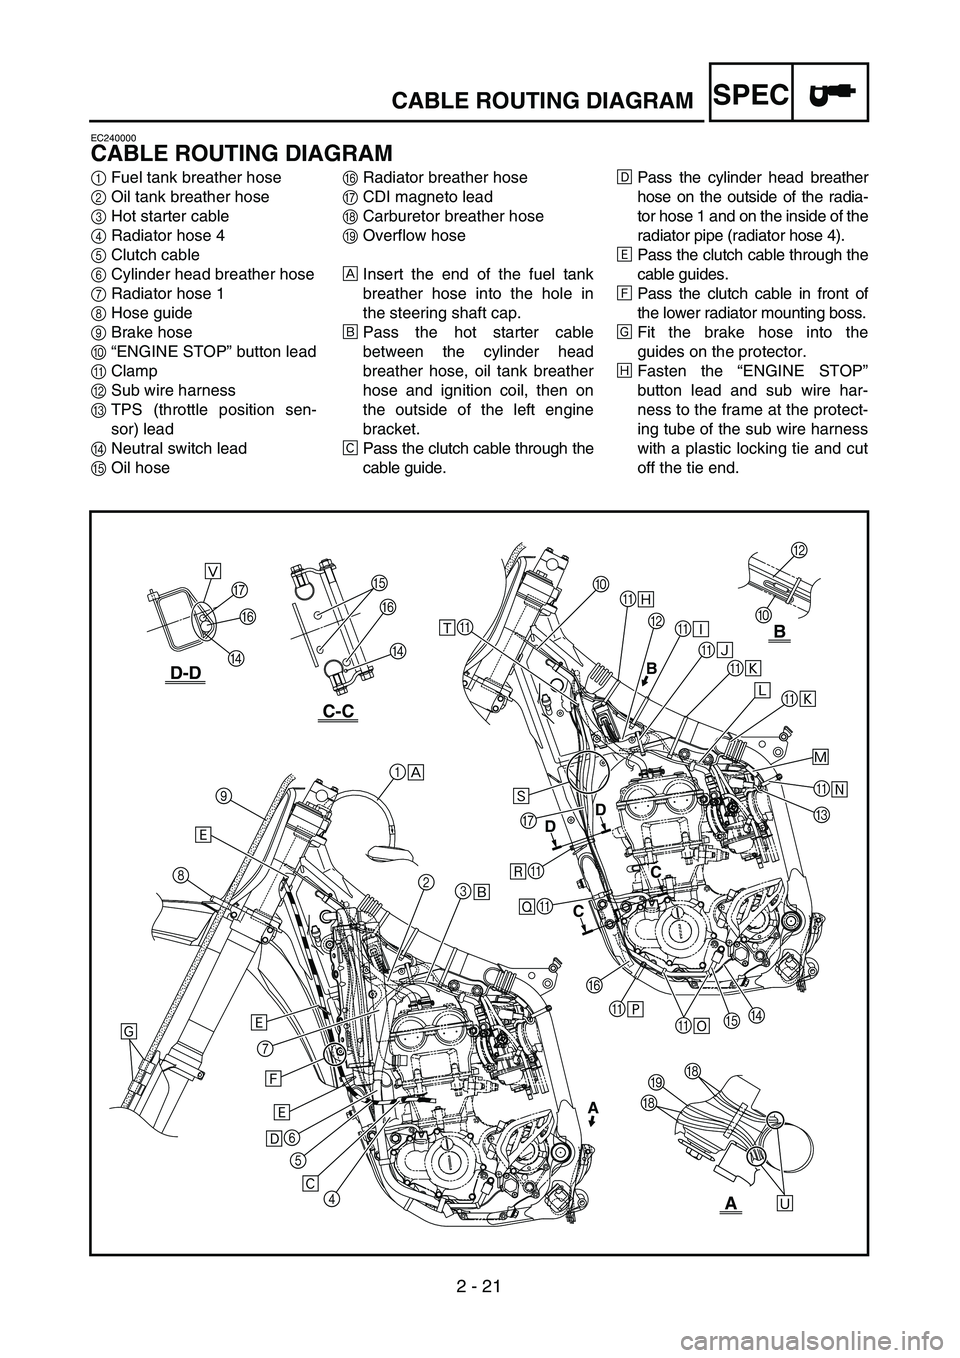 YAMAHA YZ450F 2004  Owners Manual 2 - 21
SPECCABLE ROUTING DIAGRAM
EC240000
CABLE ROUTING DIAGRAM
1Fuel tank breather hose
2Oil tank breather hose
3Hot starter cable
4Radiator hose 4
5Clutch cable
6Cylinder head breather hose
7Radiato